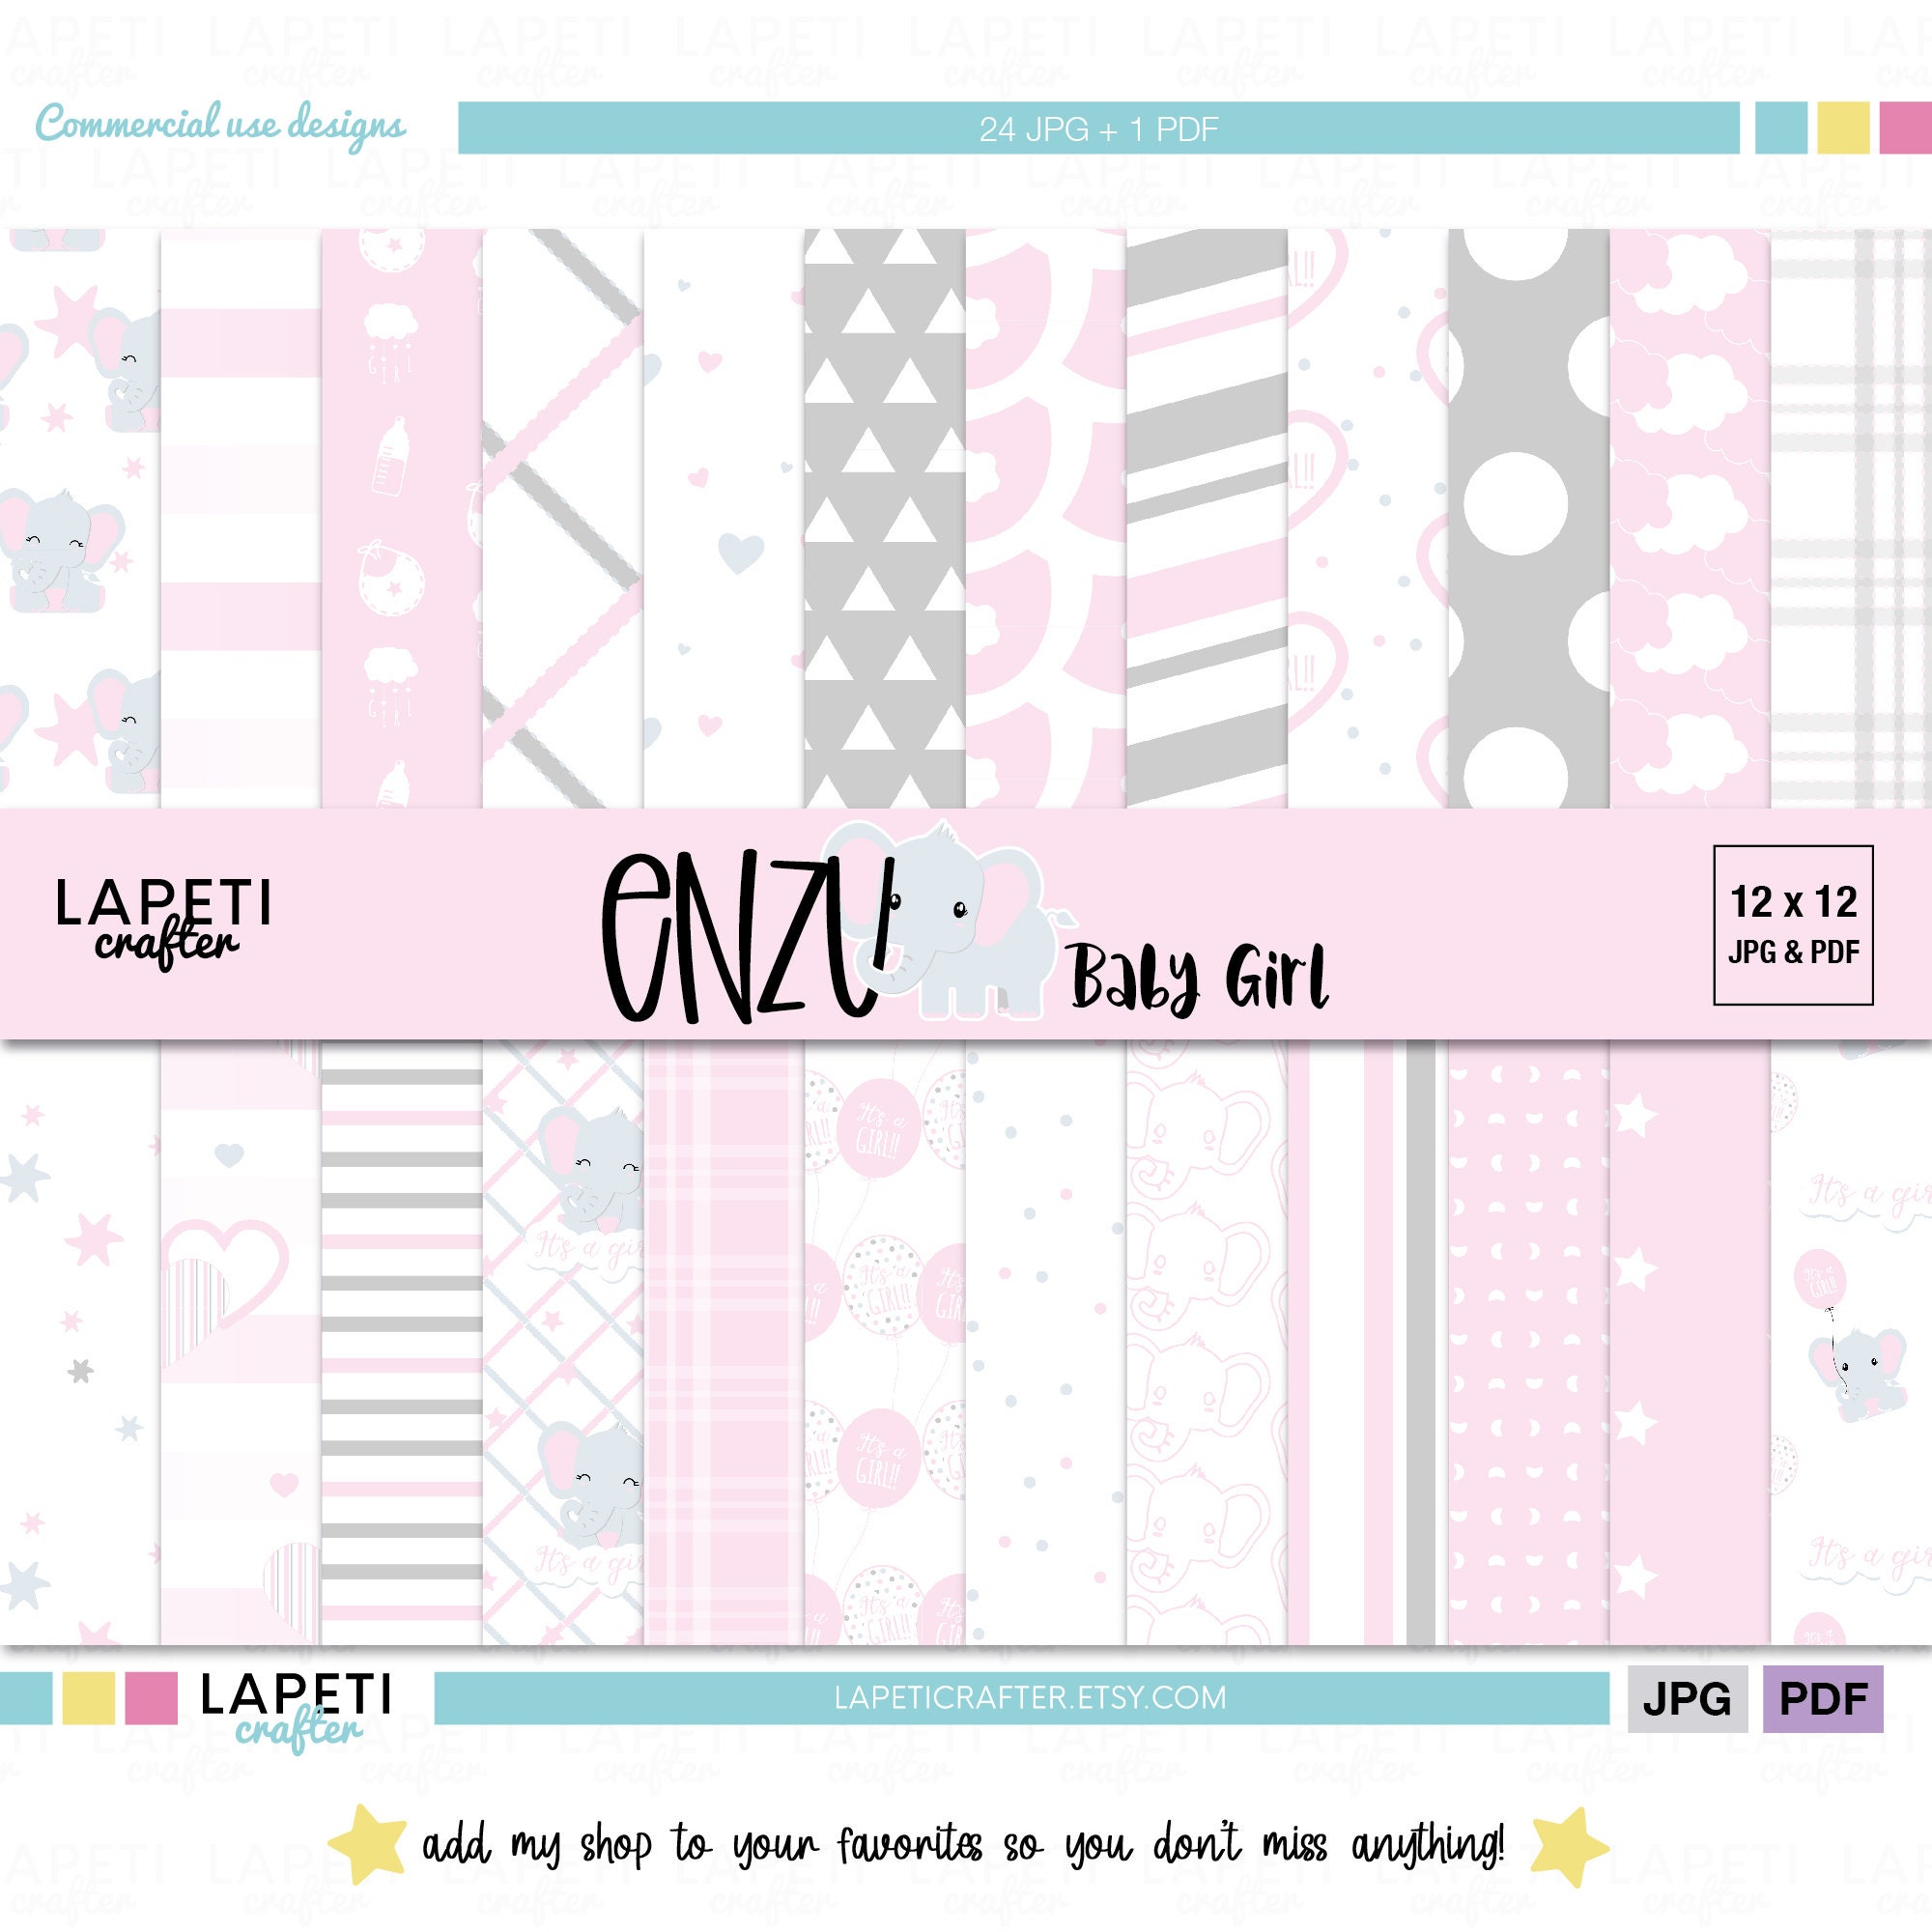 Pink Digital Paper for Scrapbooking Graphic by lapeticrafter